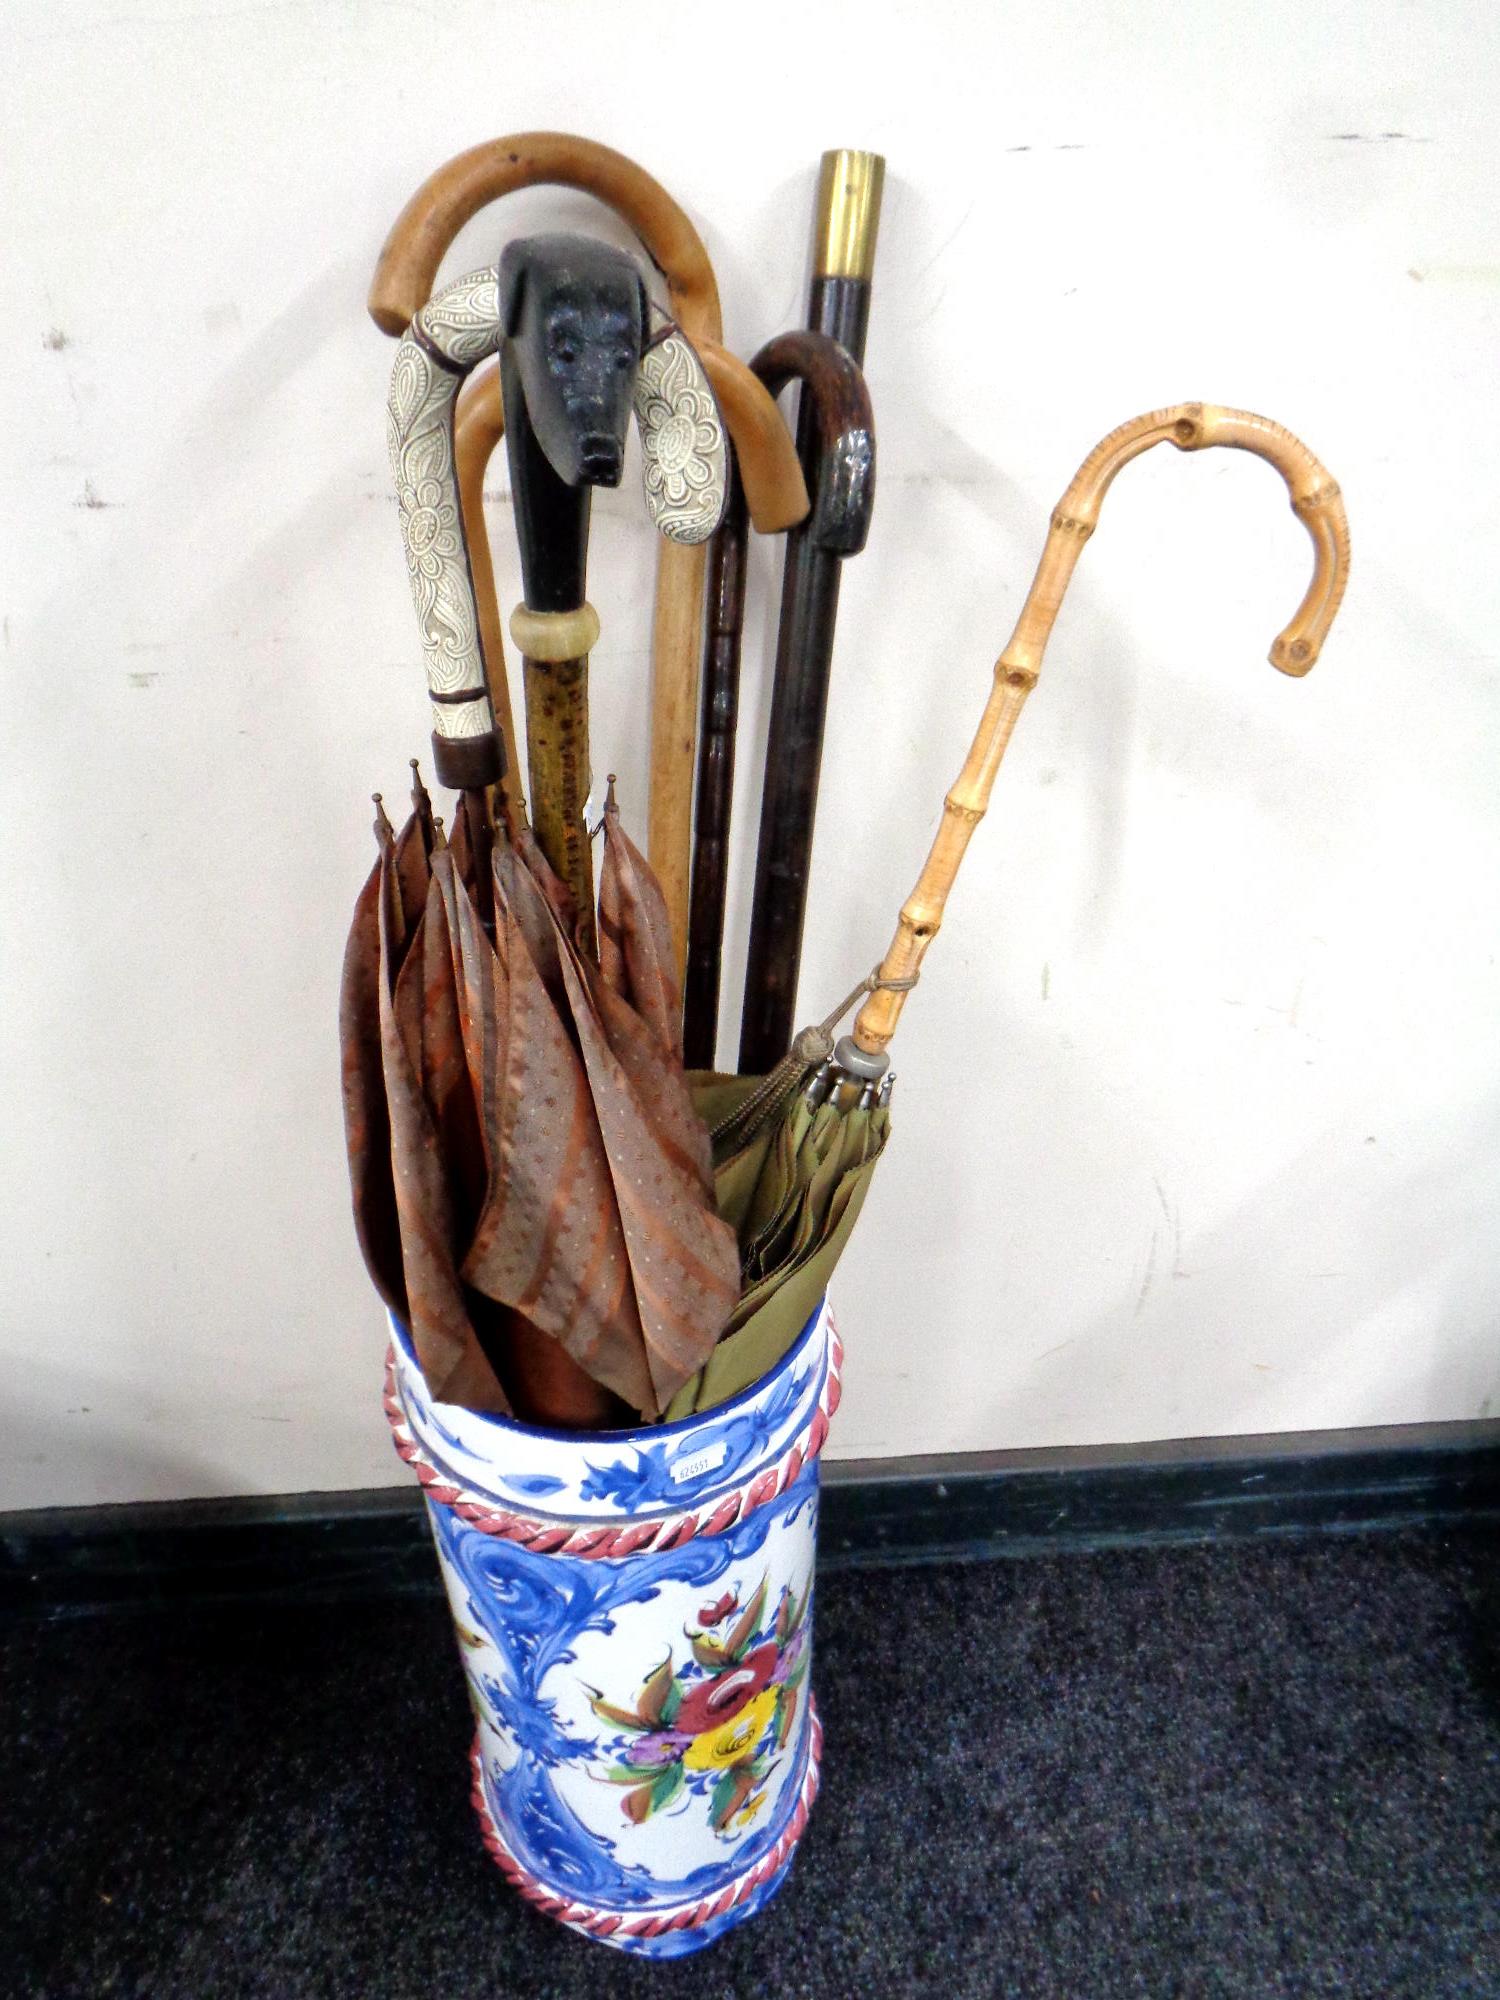 An Italian glazed ceramic stick stand containing vintage walking sticks and parasols